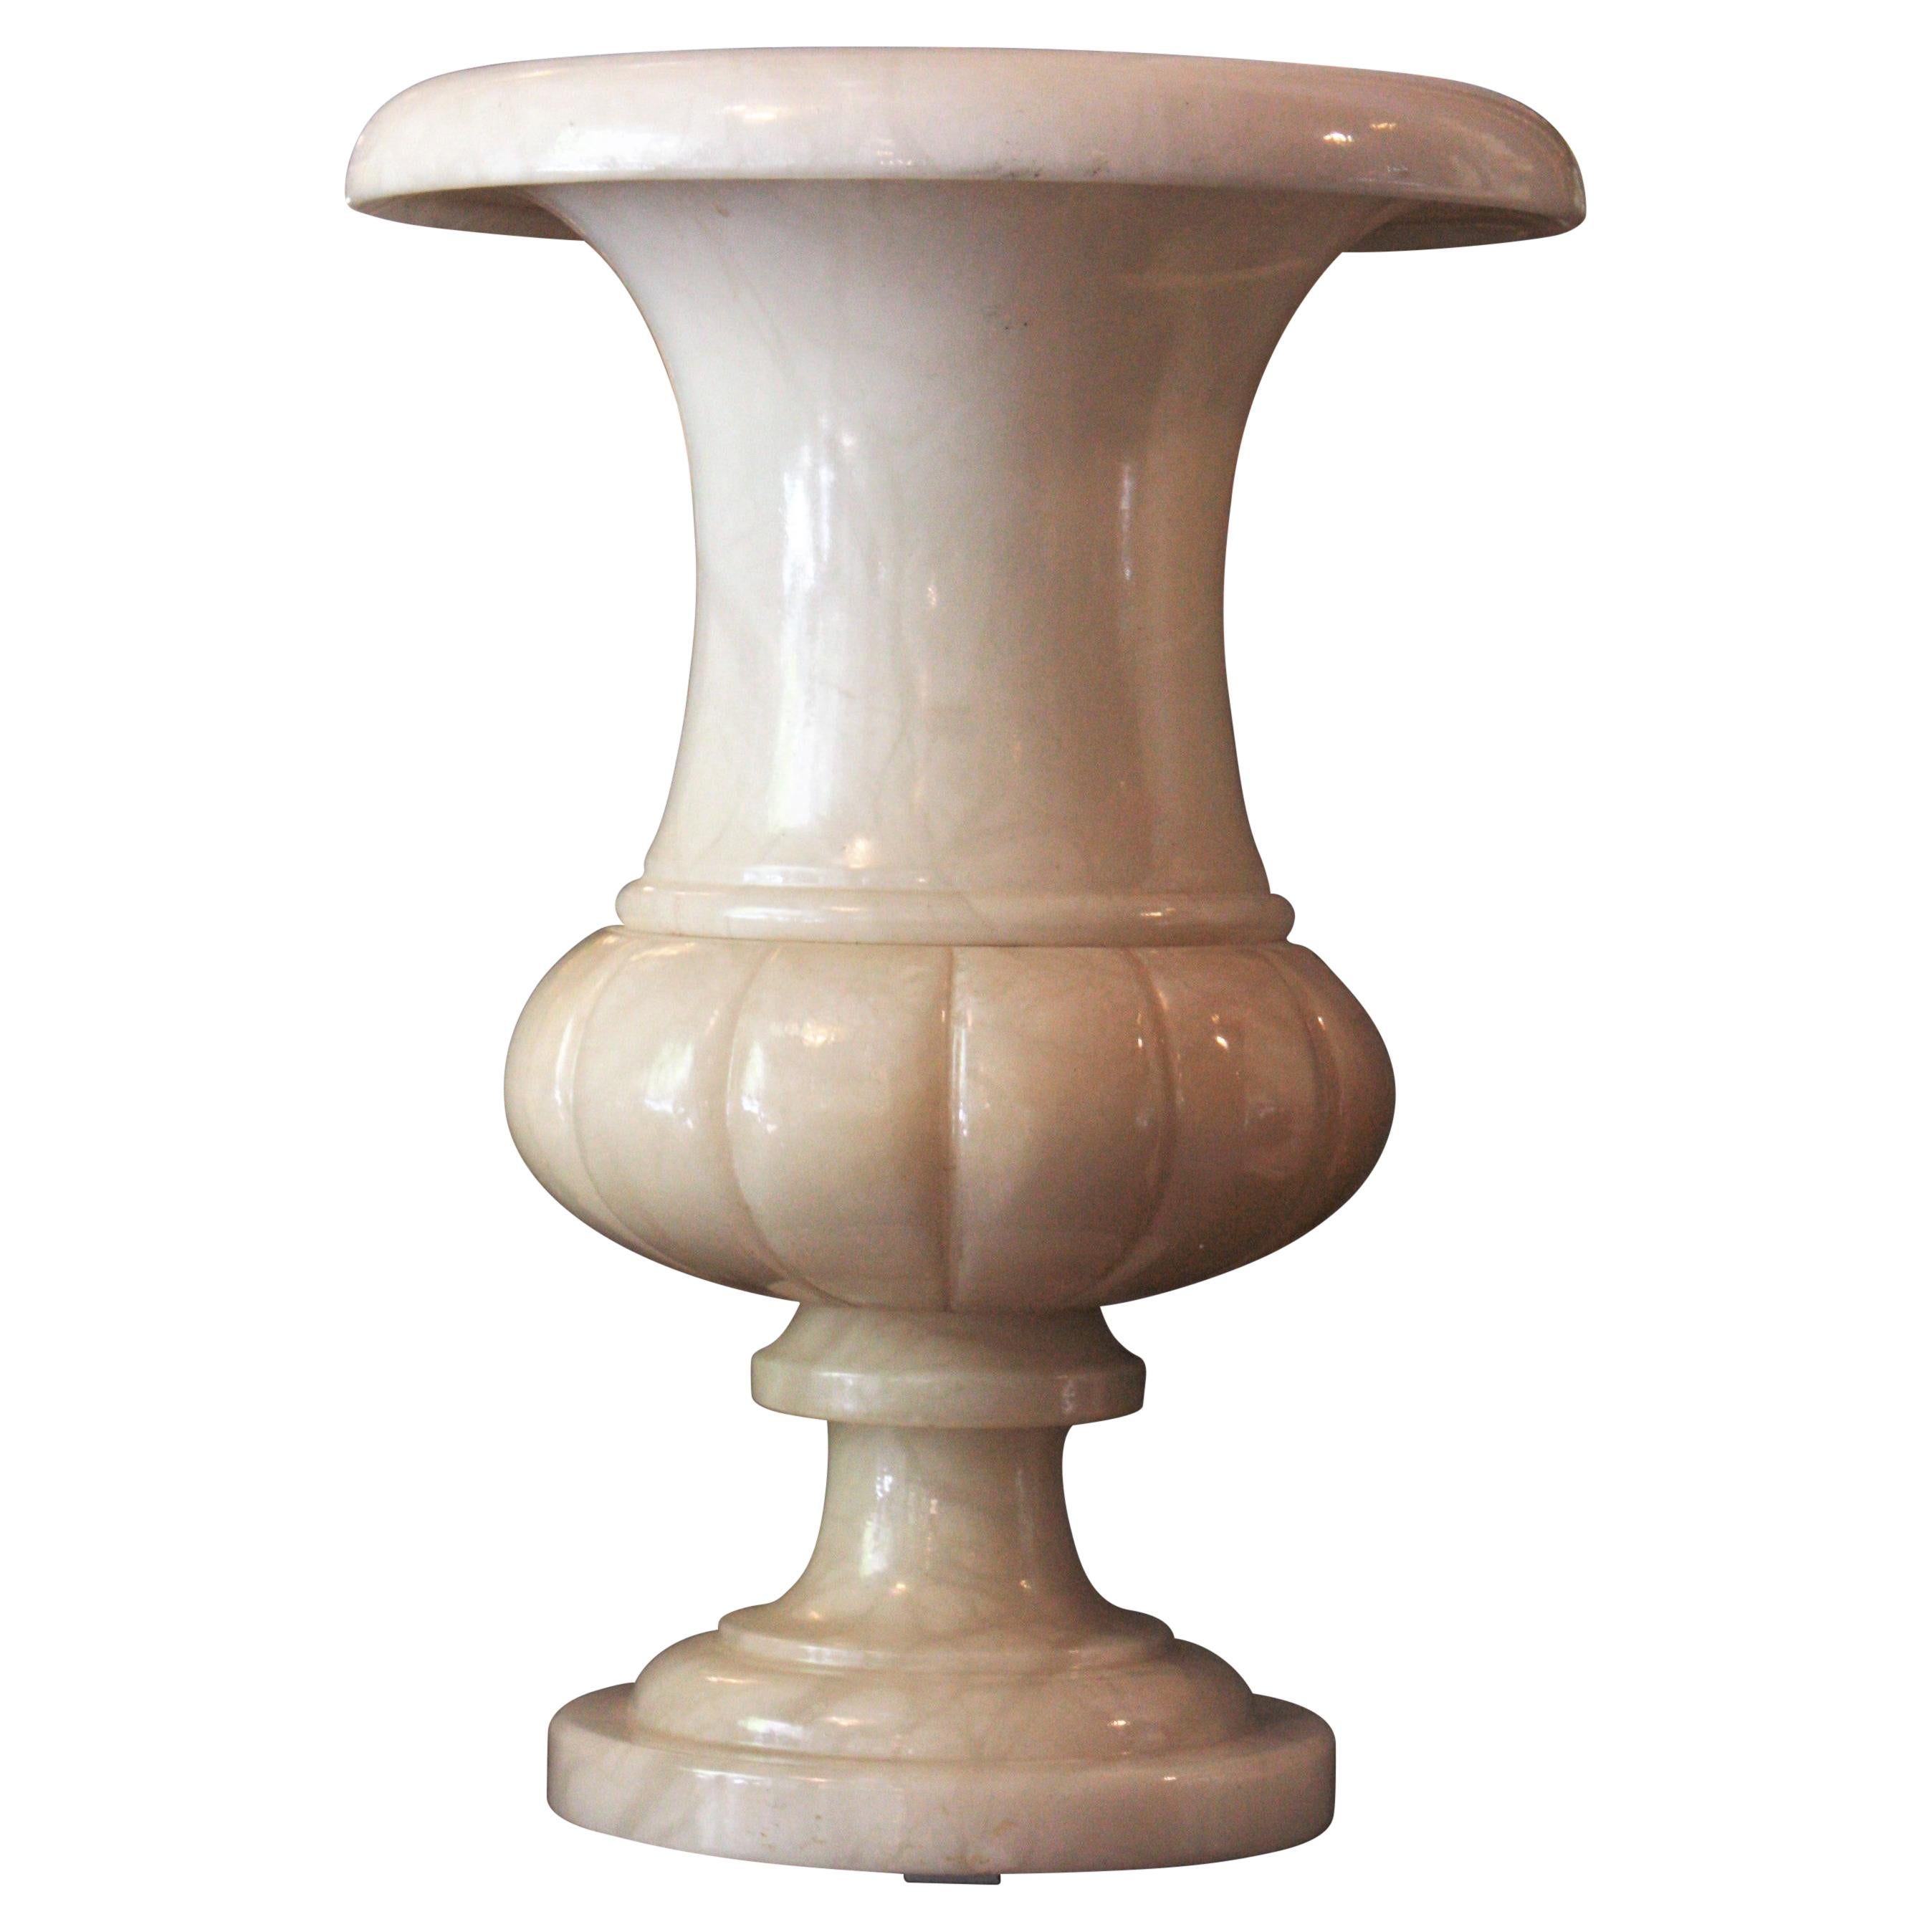 Elegant alabaster urn table lamp with neoclassical design. Spain, 1940-1950s
This turned alabaster urn lamp with classical design has carved details on the bottom part. It has a nice color and patina providing a charming light when lit.
This